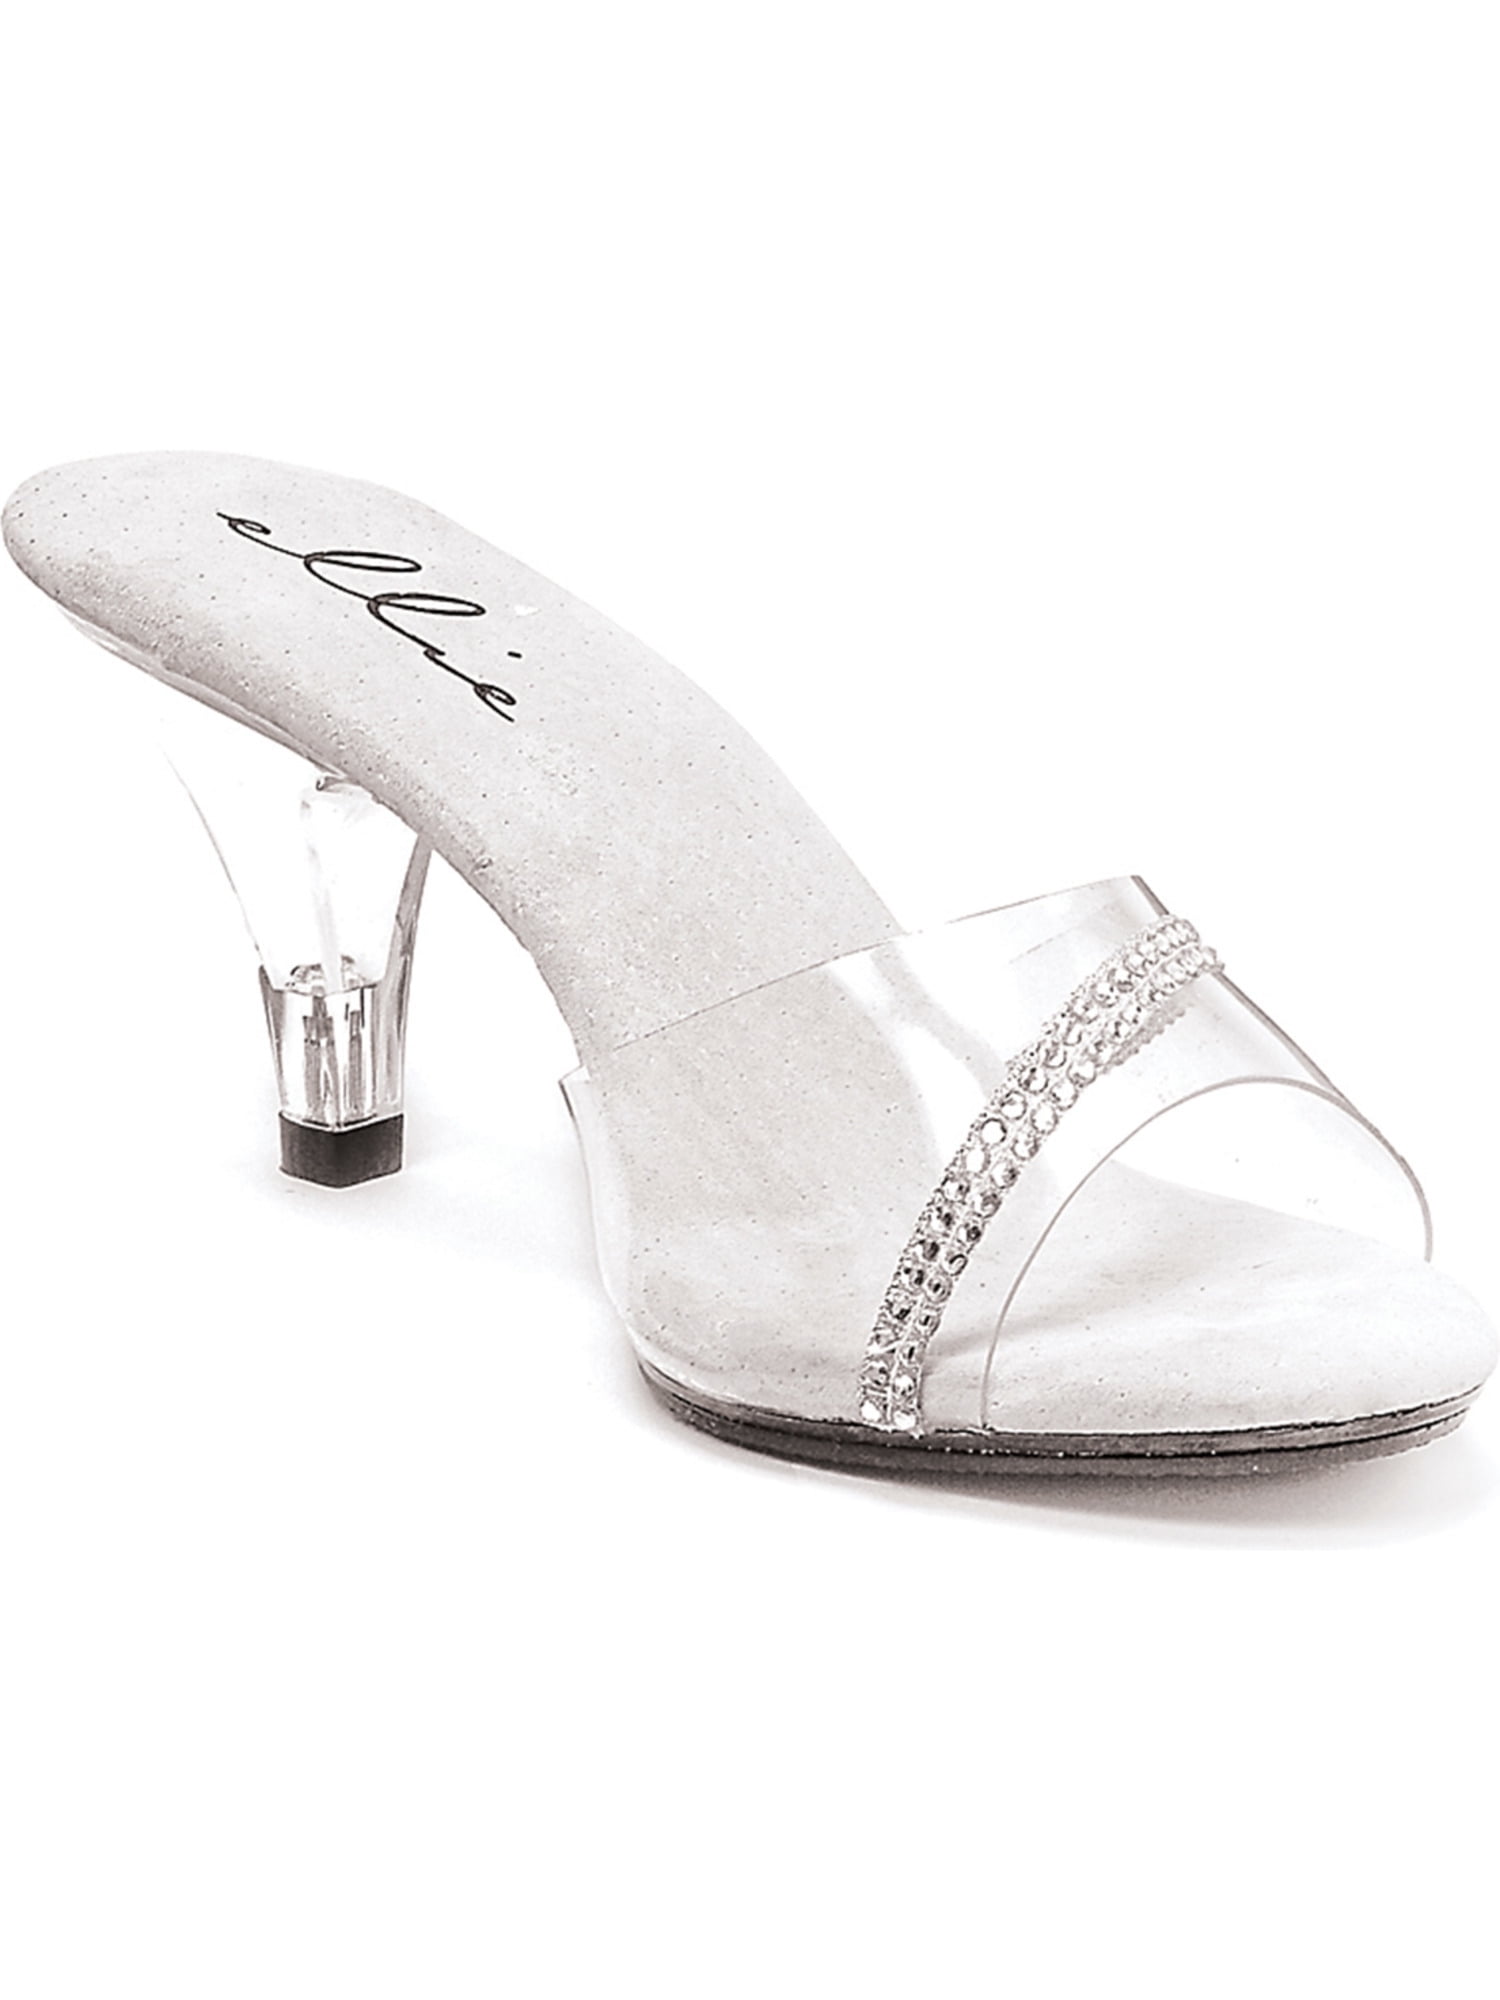 clear shoes 3 inch heels